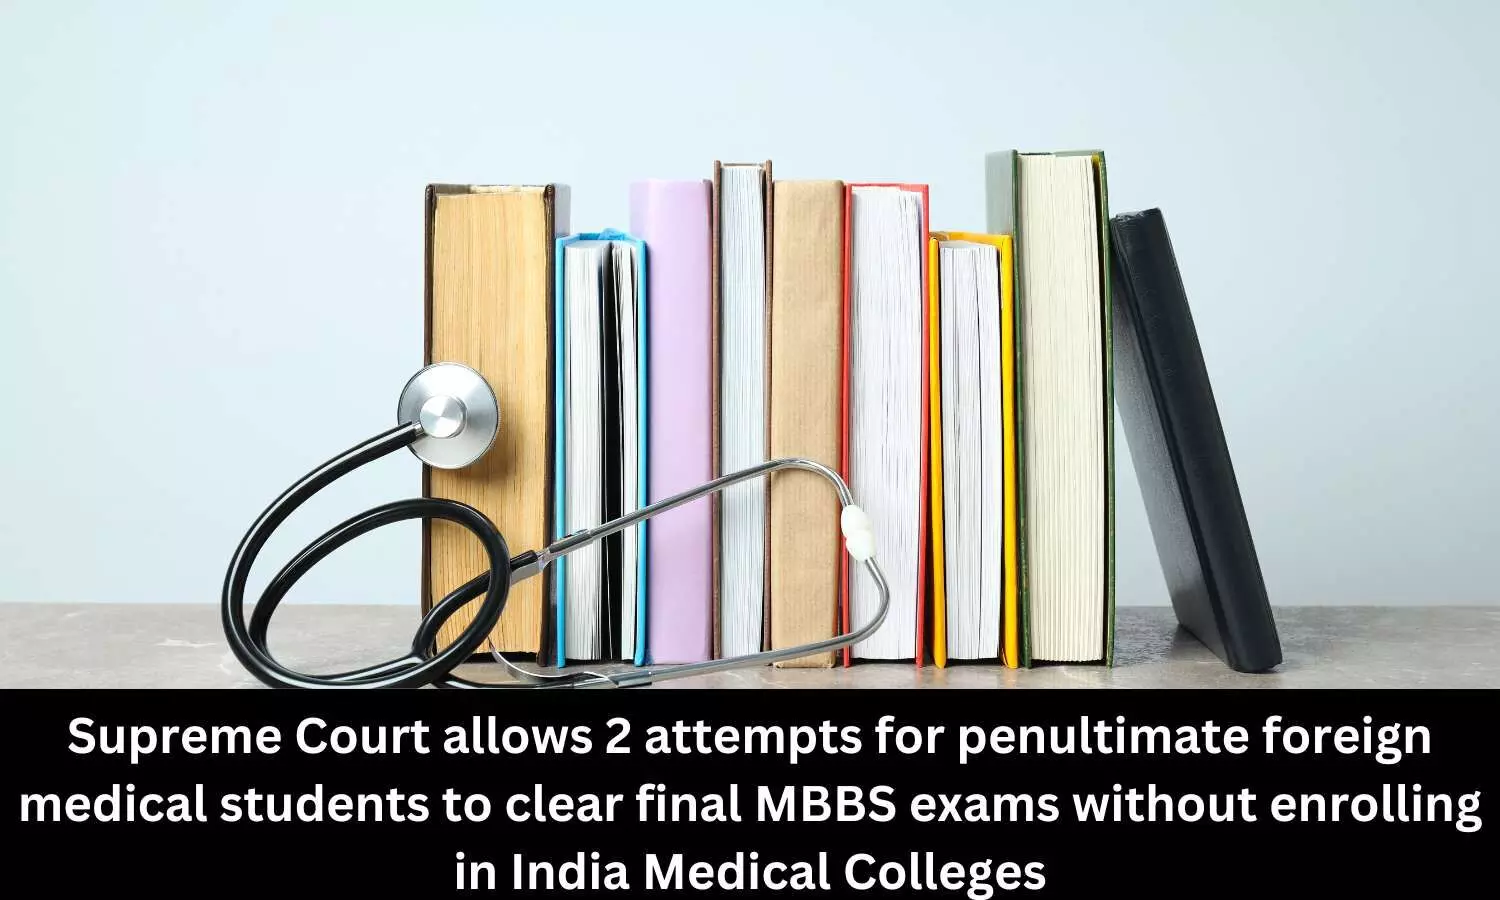 SC allows 2 attempts for penultimate foreign medical students to clear final MBBS exams without enrolling in India medical colleges